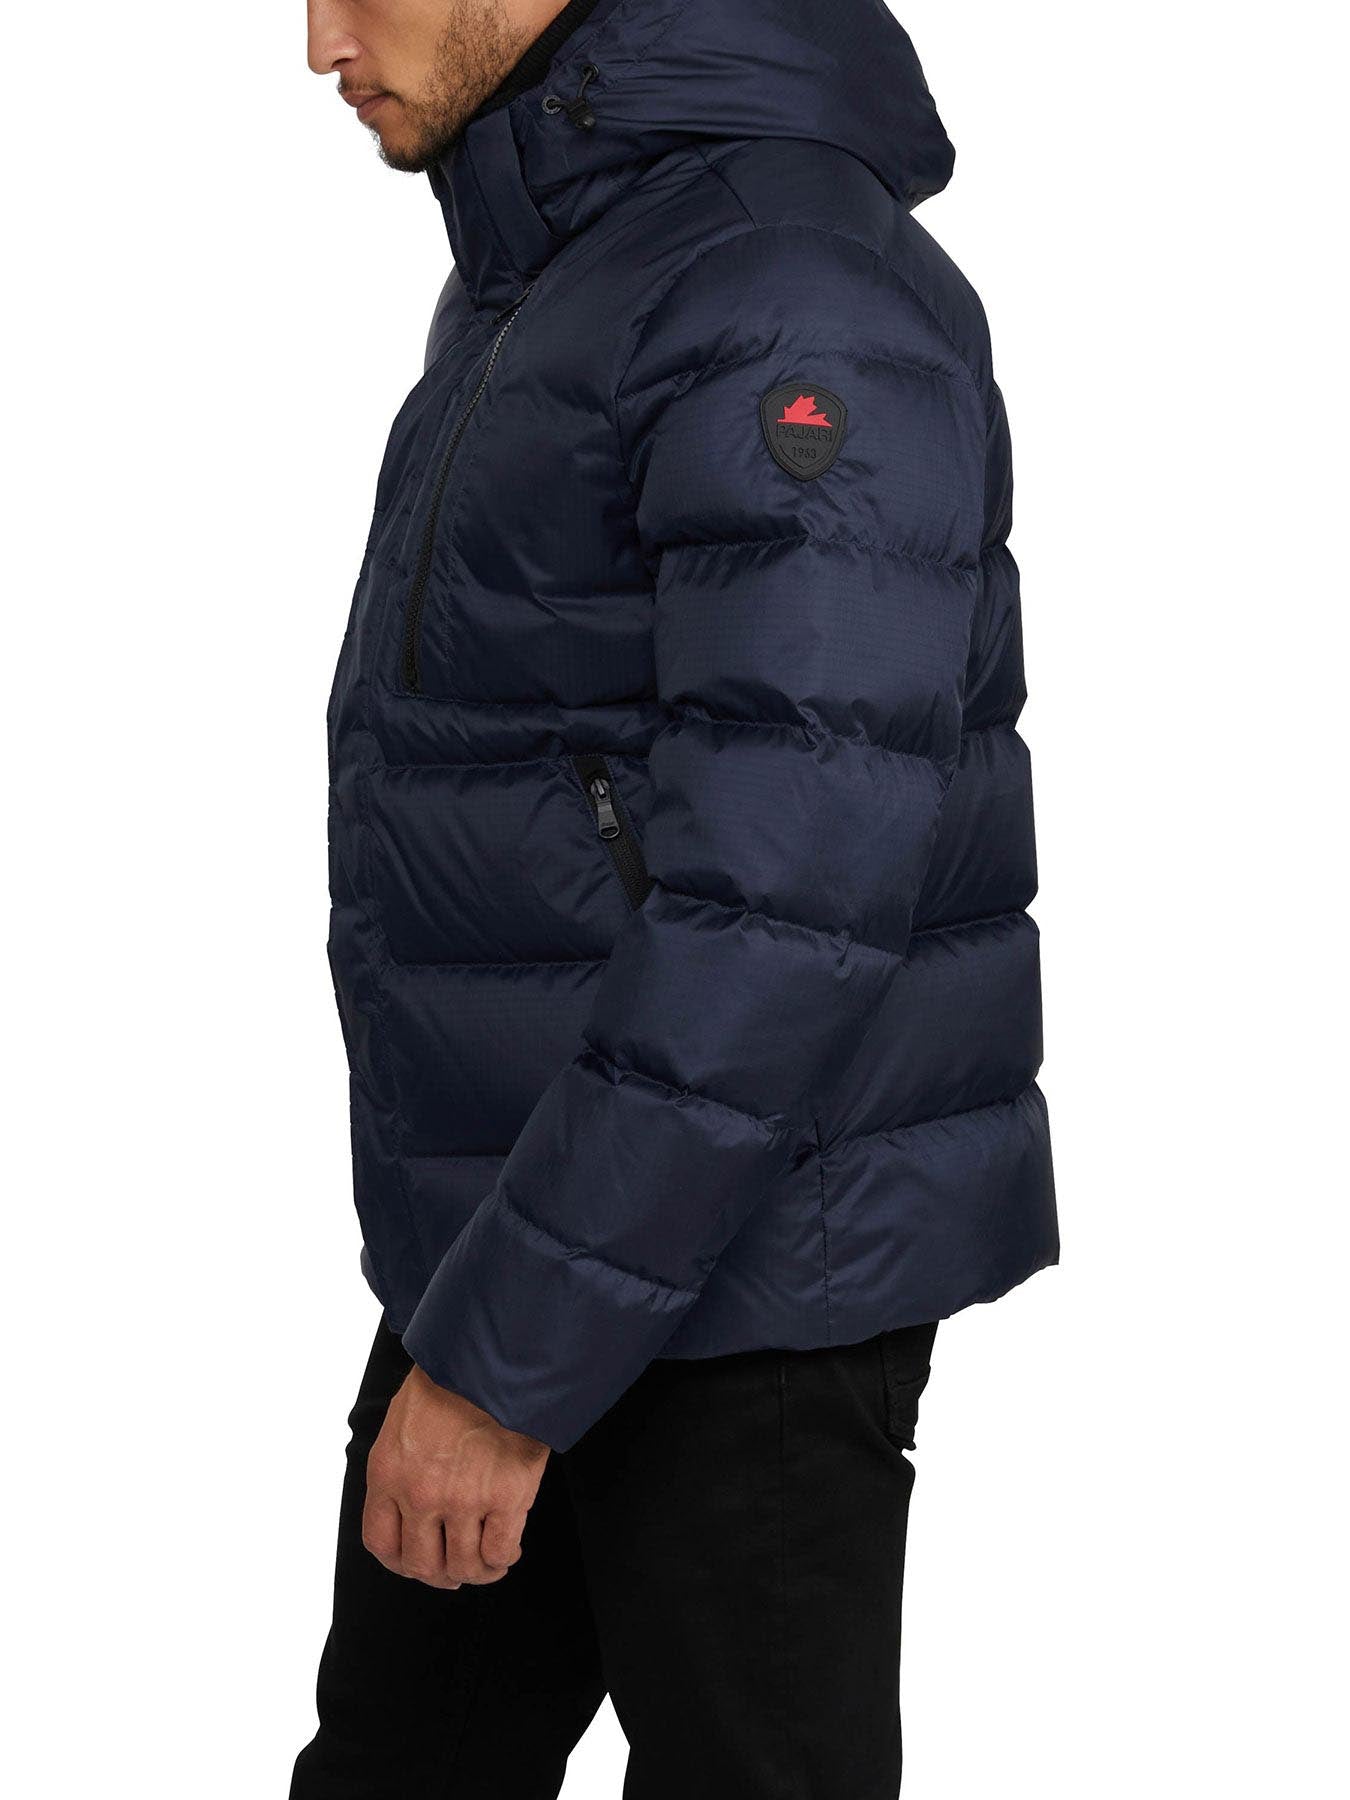 Jericho Men's Quilted Puffer